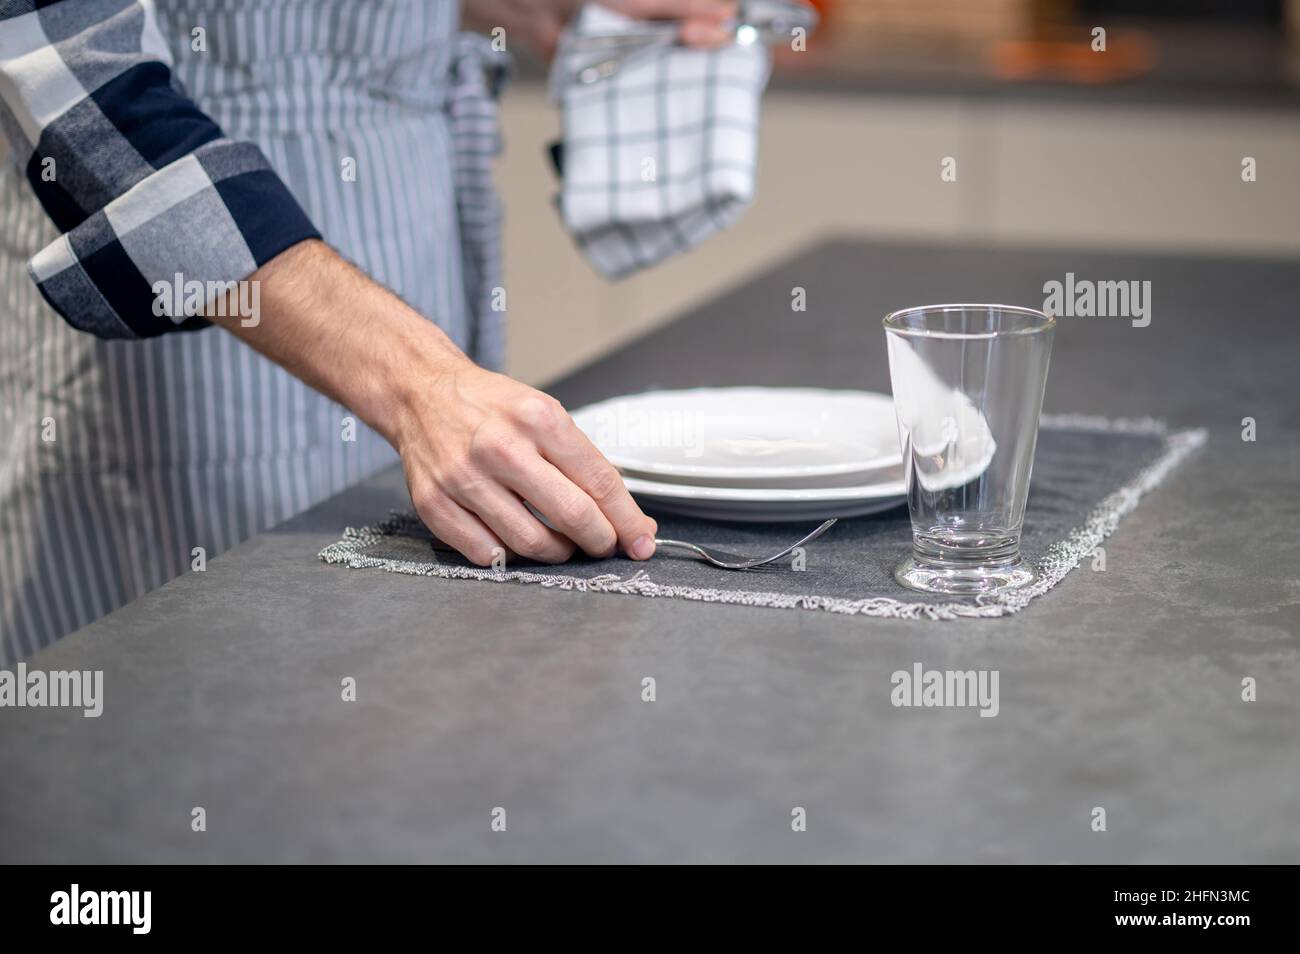 Male hand putting fork on napkin near plate Stock Photo